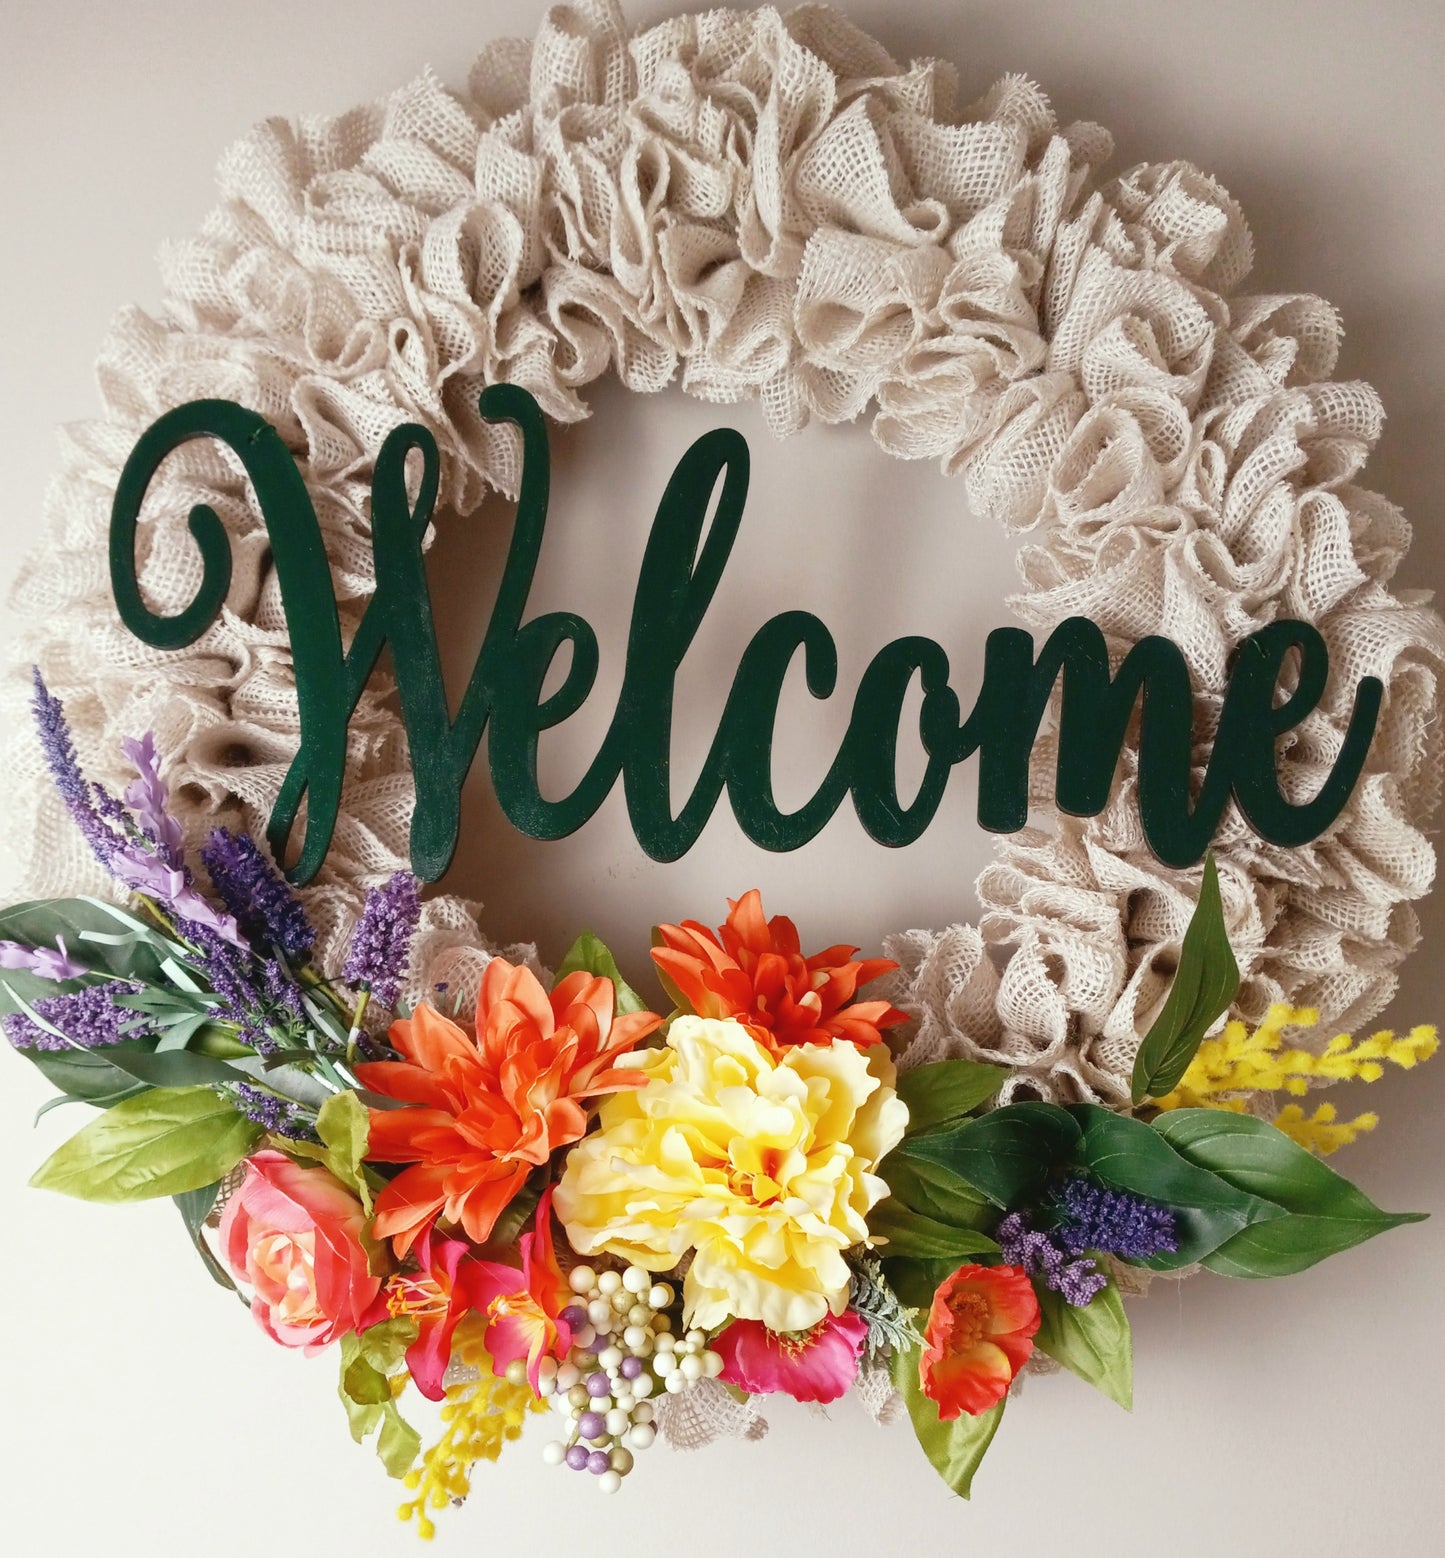 White Burlap Wreath with Welcome sign